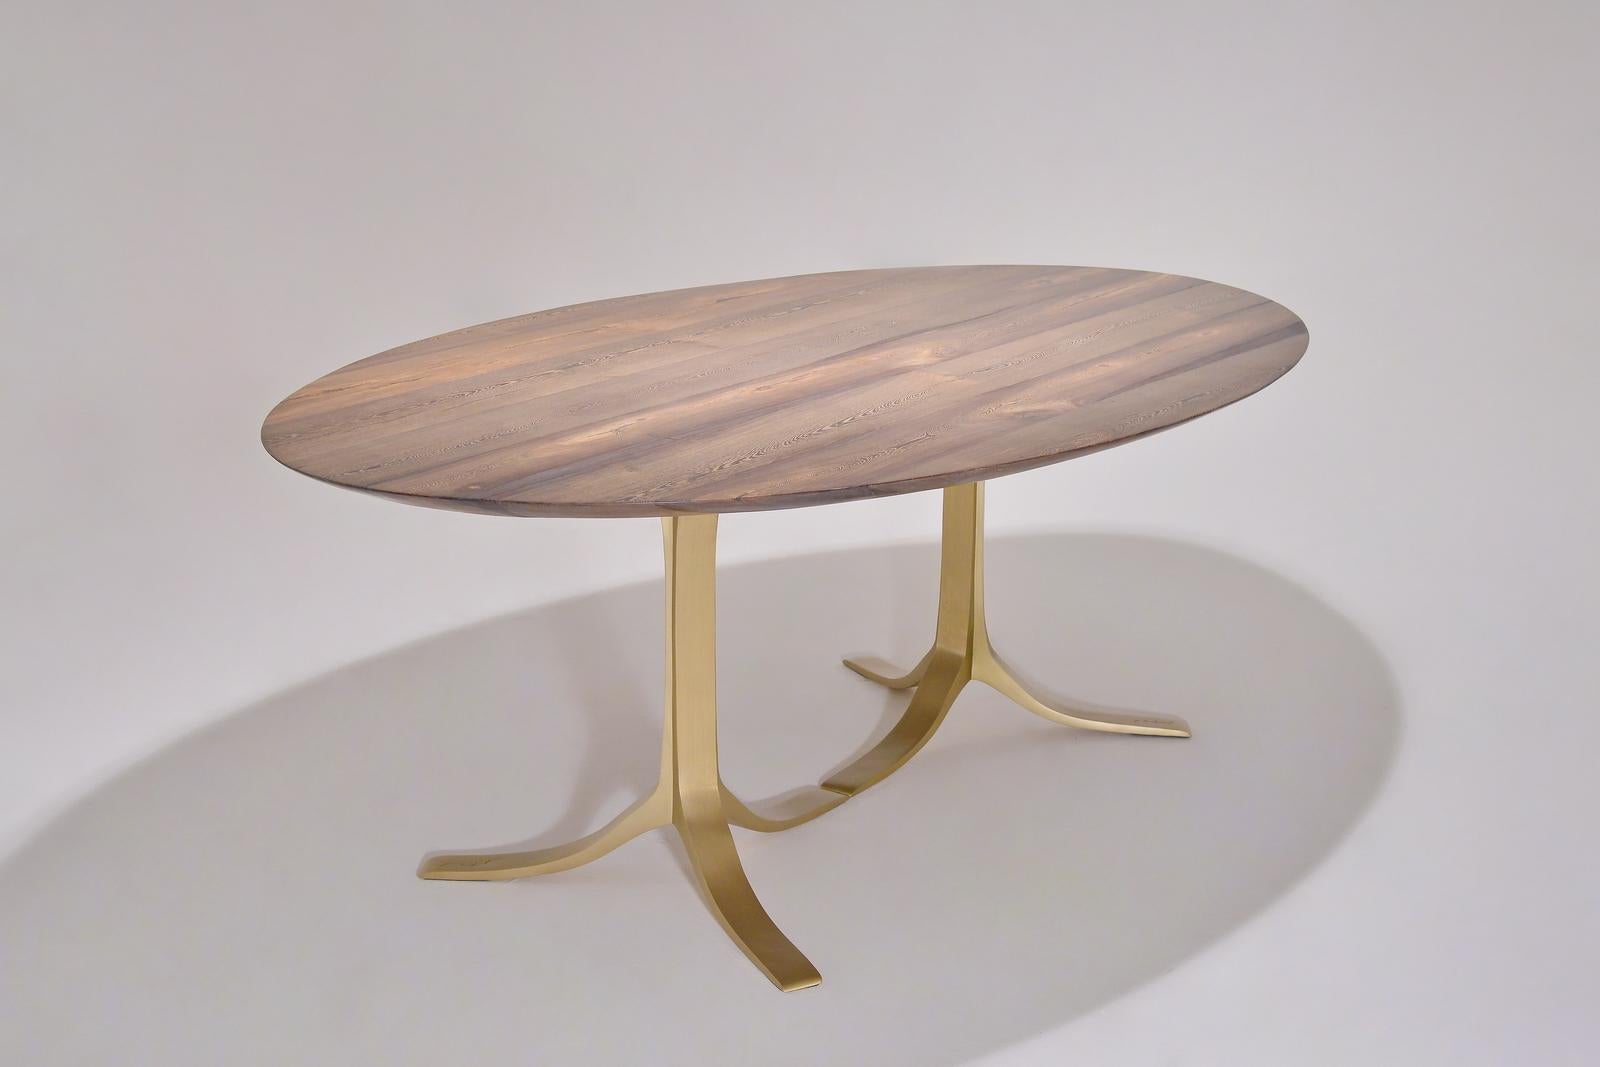 In stock

We just finished this table just in time to exhibit in conjunction with the artist Auréle's 